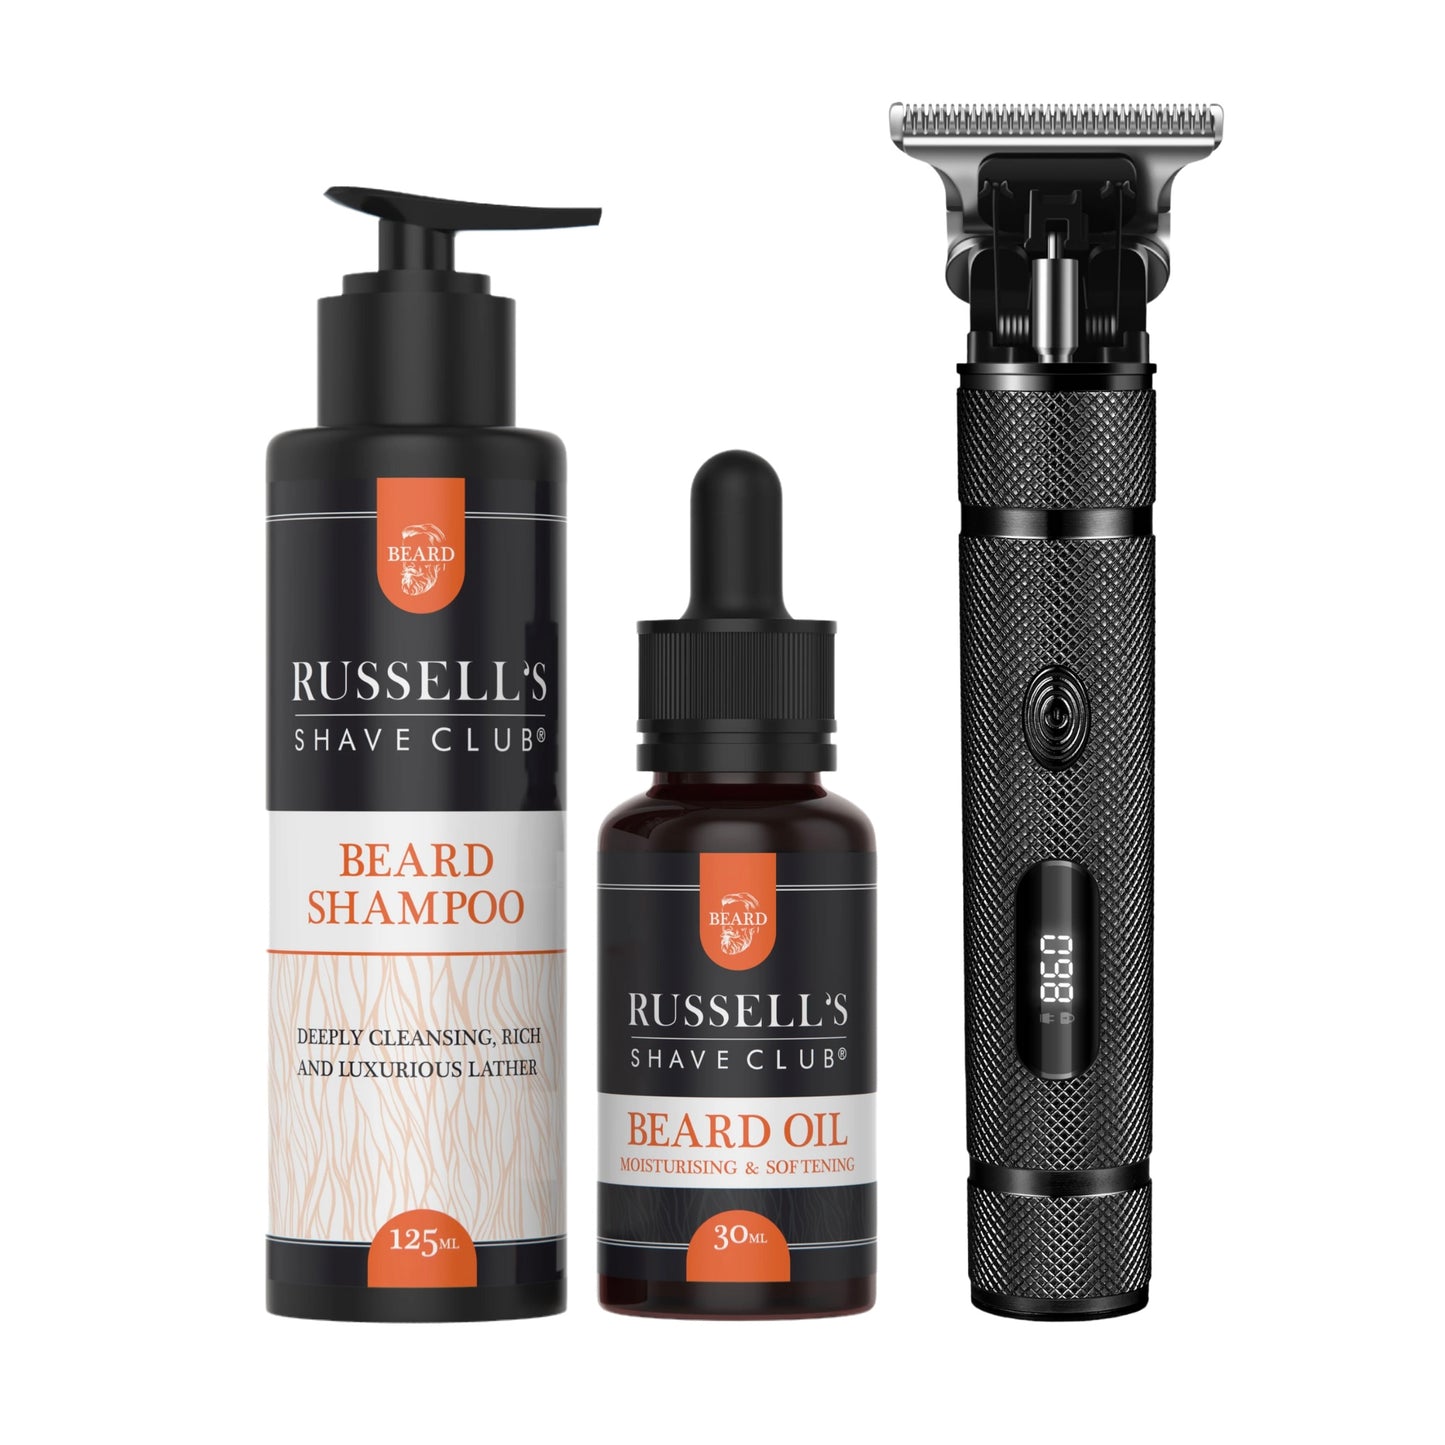 Russell's Precision Pro Beard Mastery Kit: The Ultimate Beard Care & Grooming Kit